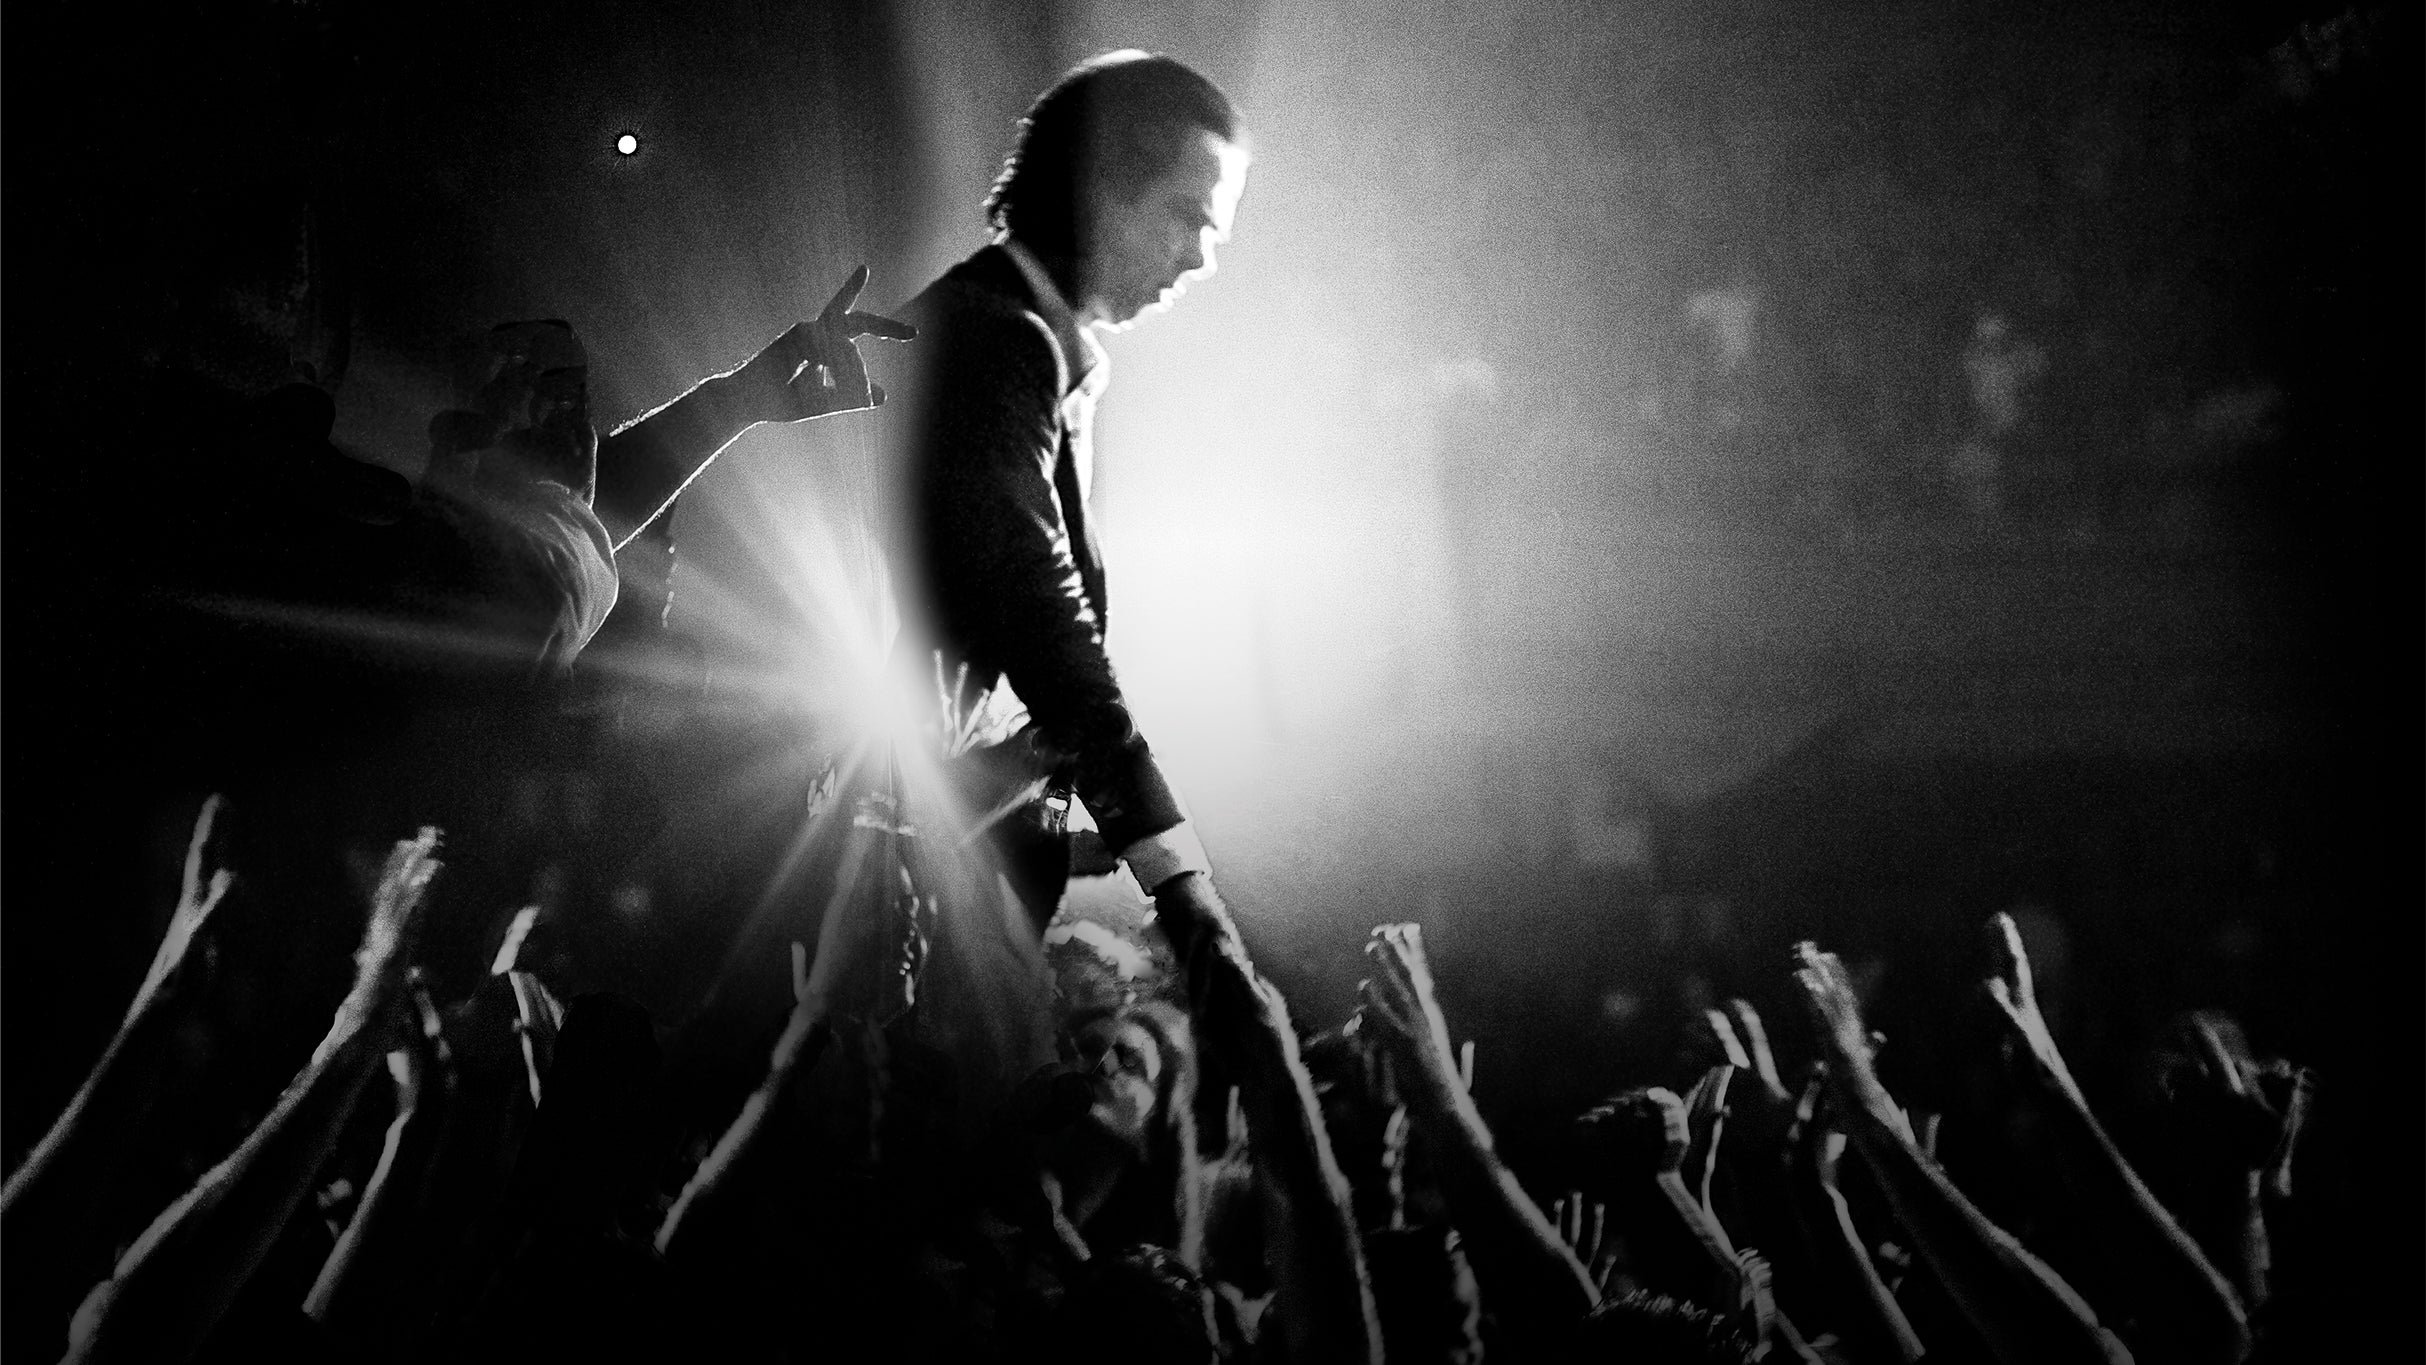 Nick Cave & the Bad Seeds : The Wild God Tour in Birmingham promo photo for Spotify presale offer code